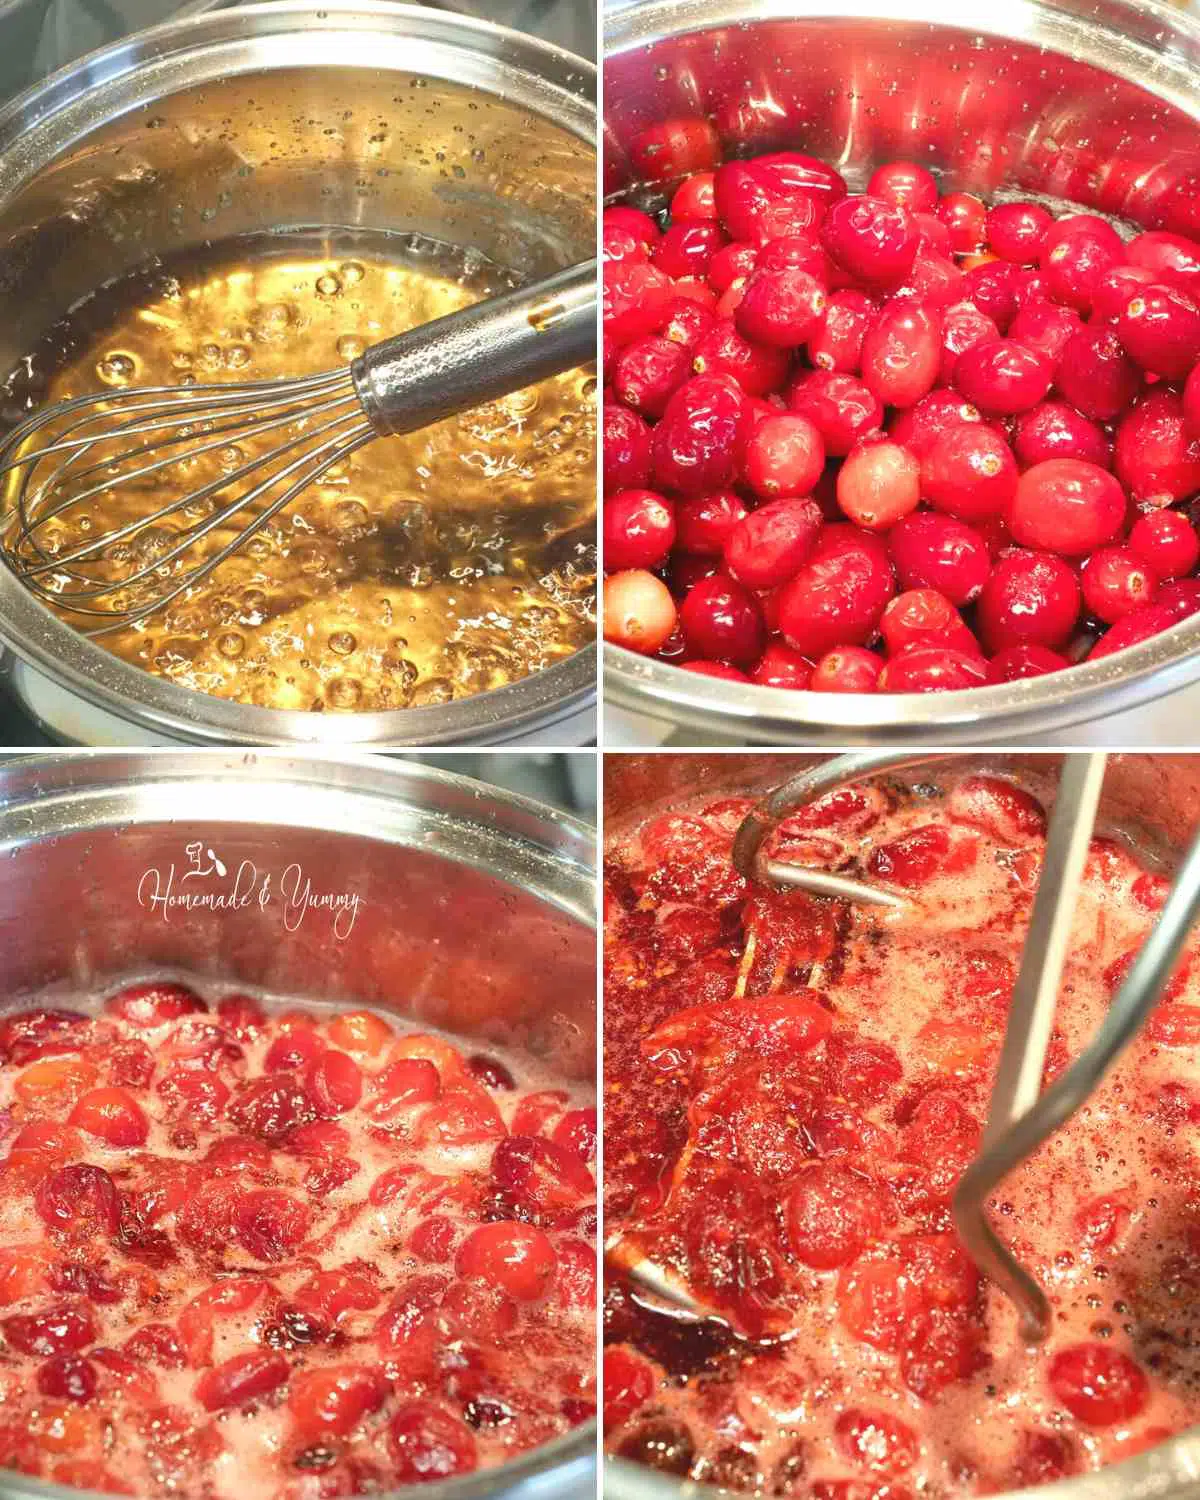 Collage of steps involved to cook the cranberries into a sauce.